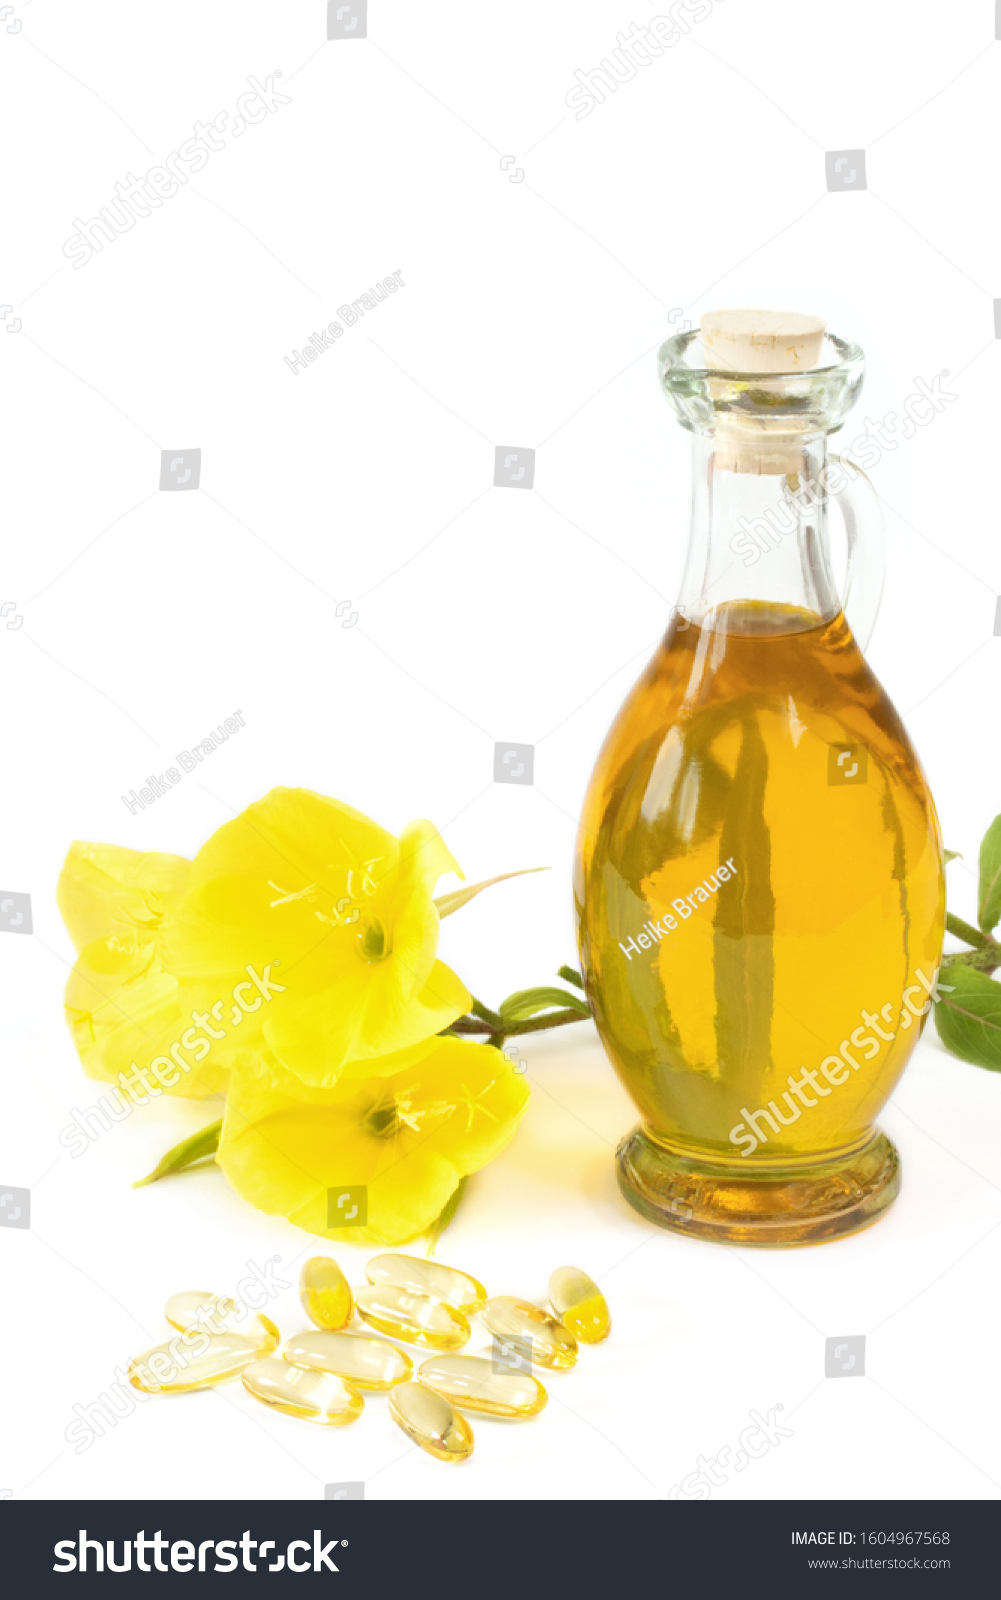 evening primroses with gelatine capsules and oil bottle on white background #1604967568